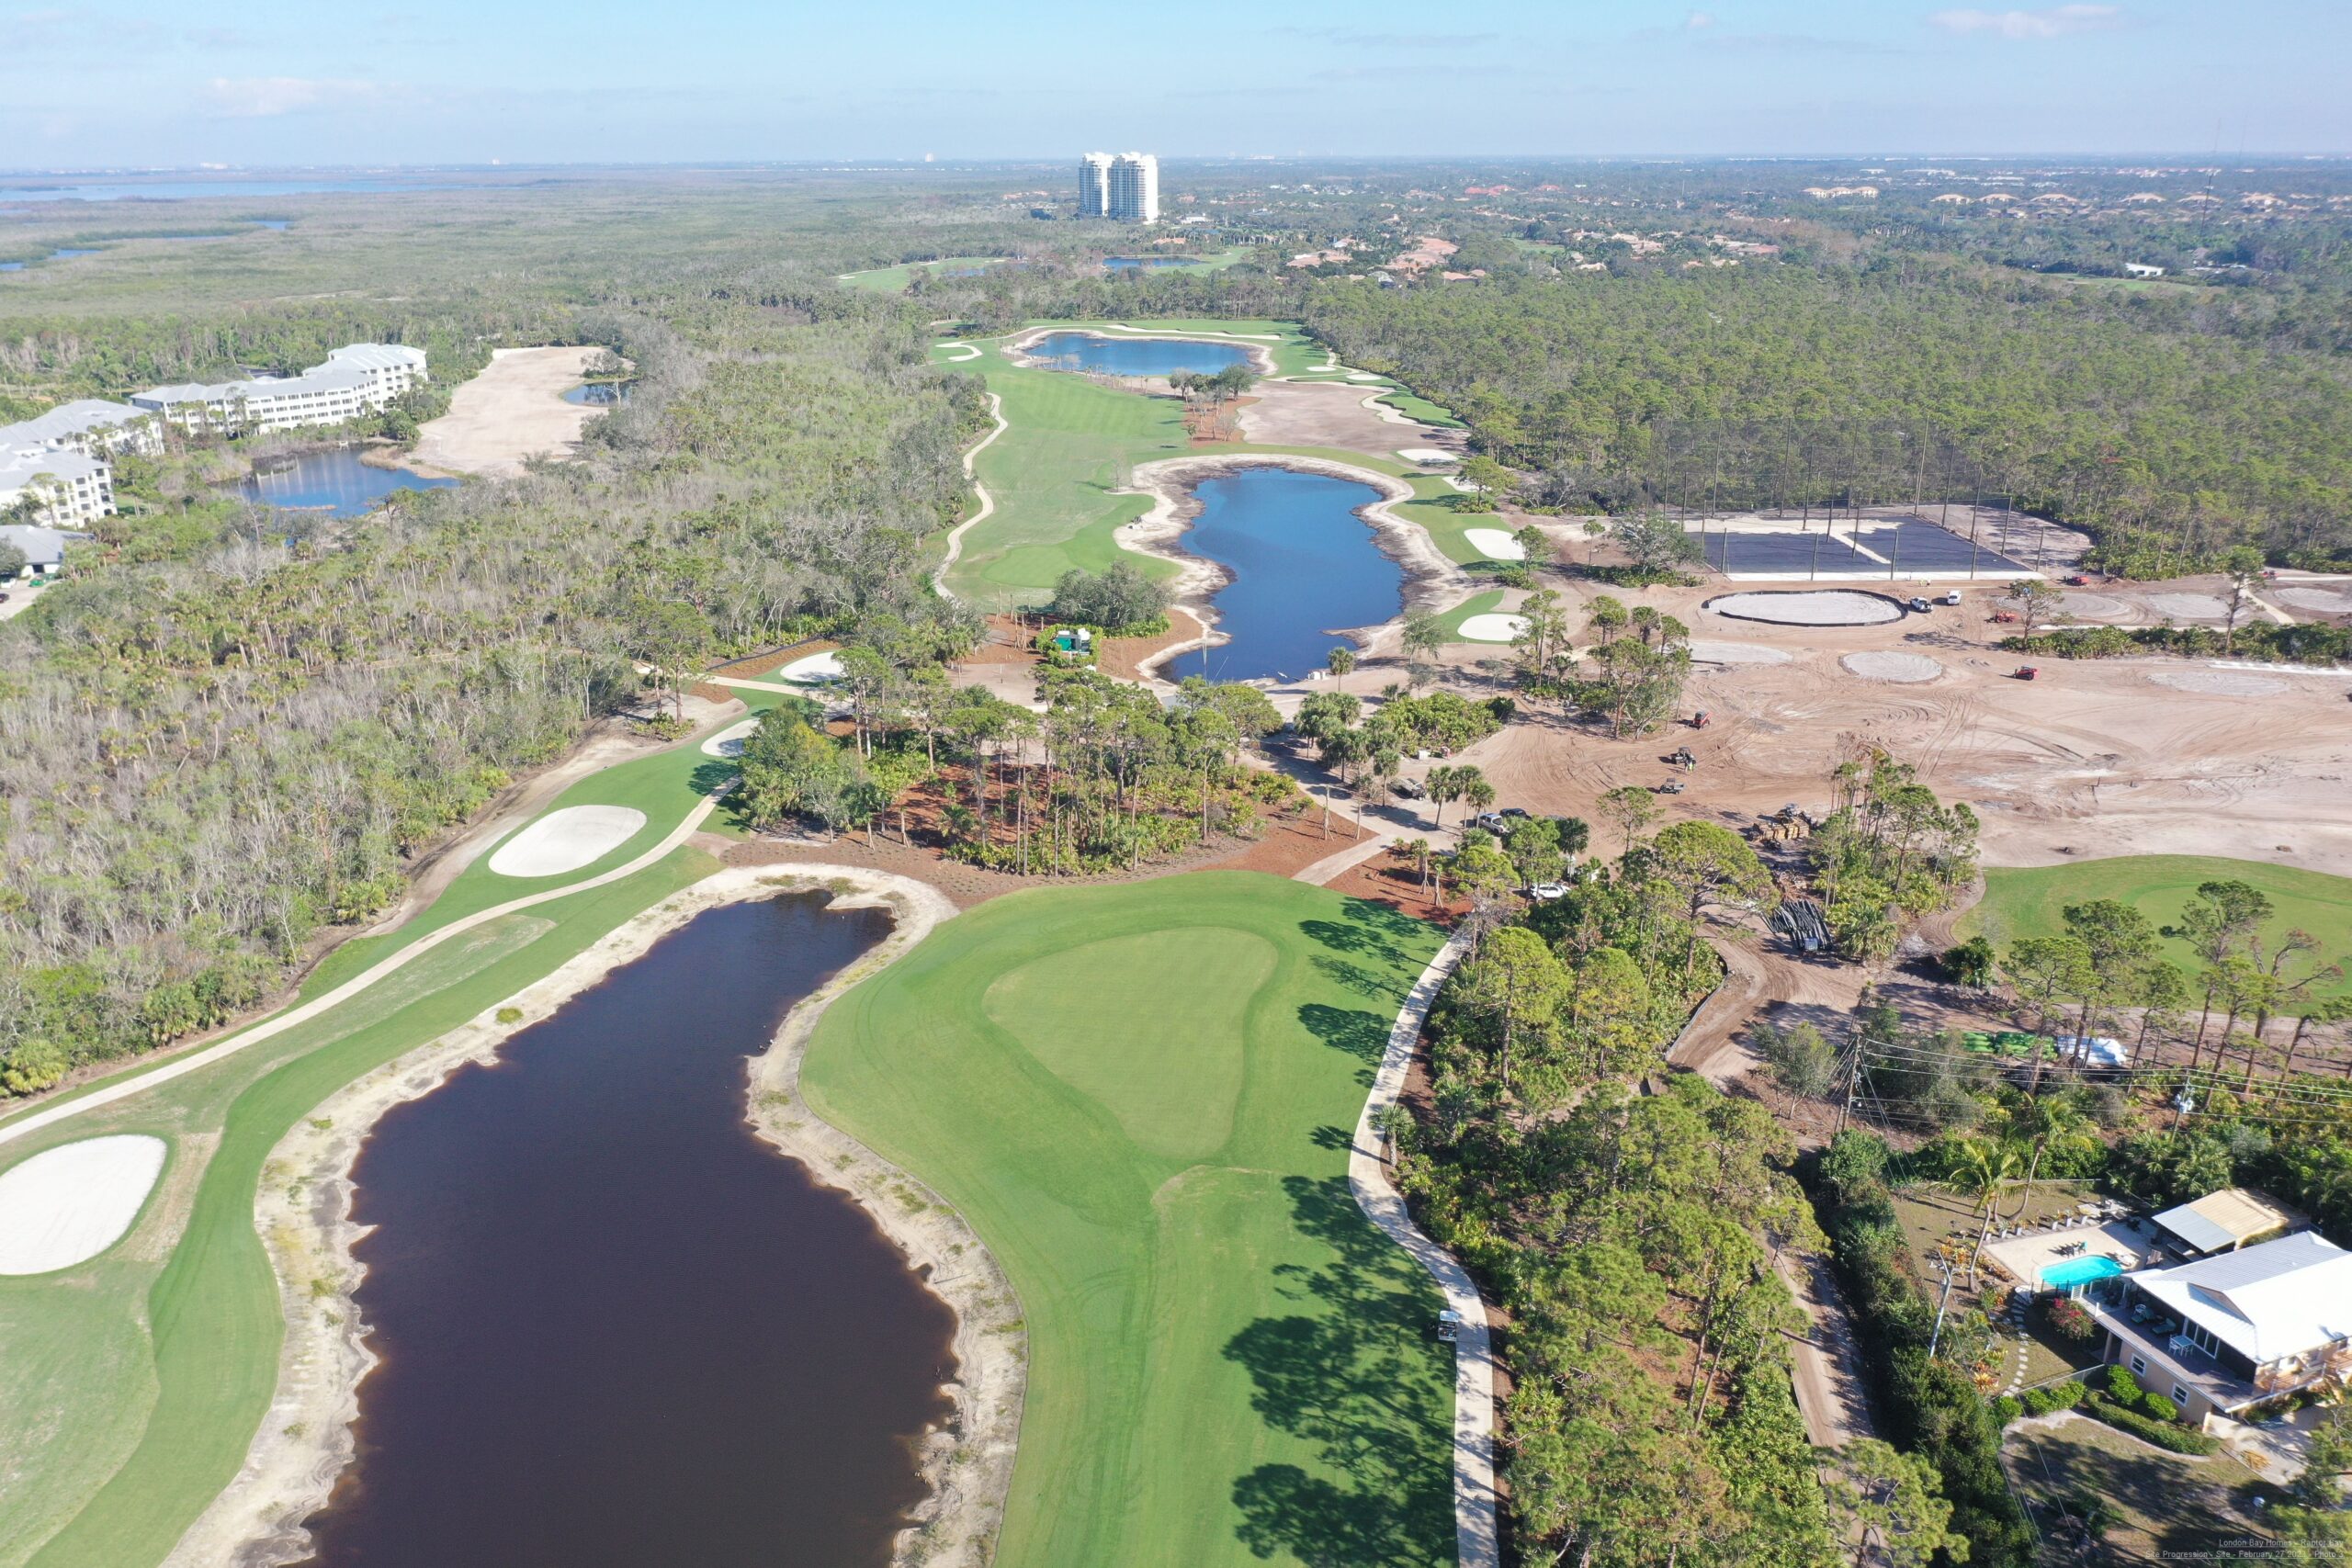 An aerial view of the championship golf course at Saltleaf Golf Preserve in Bonita Springs, with water featuring prominently.